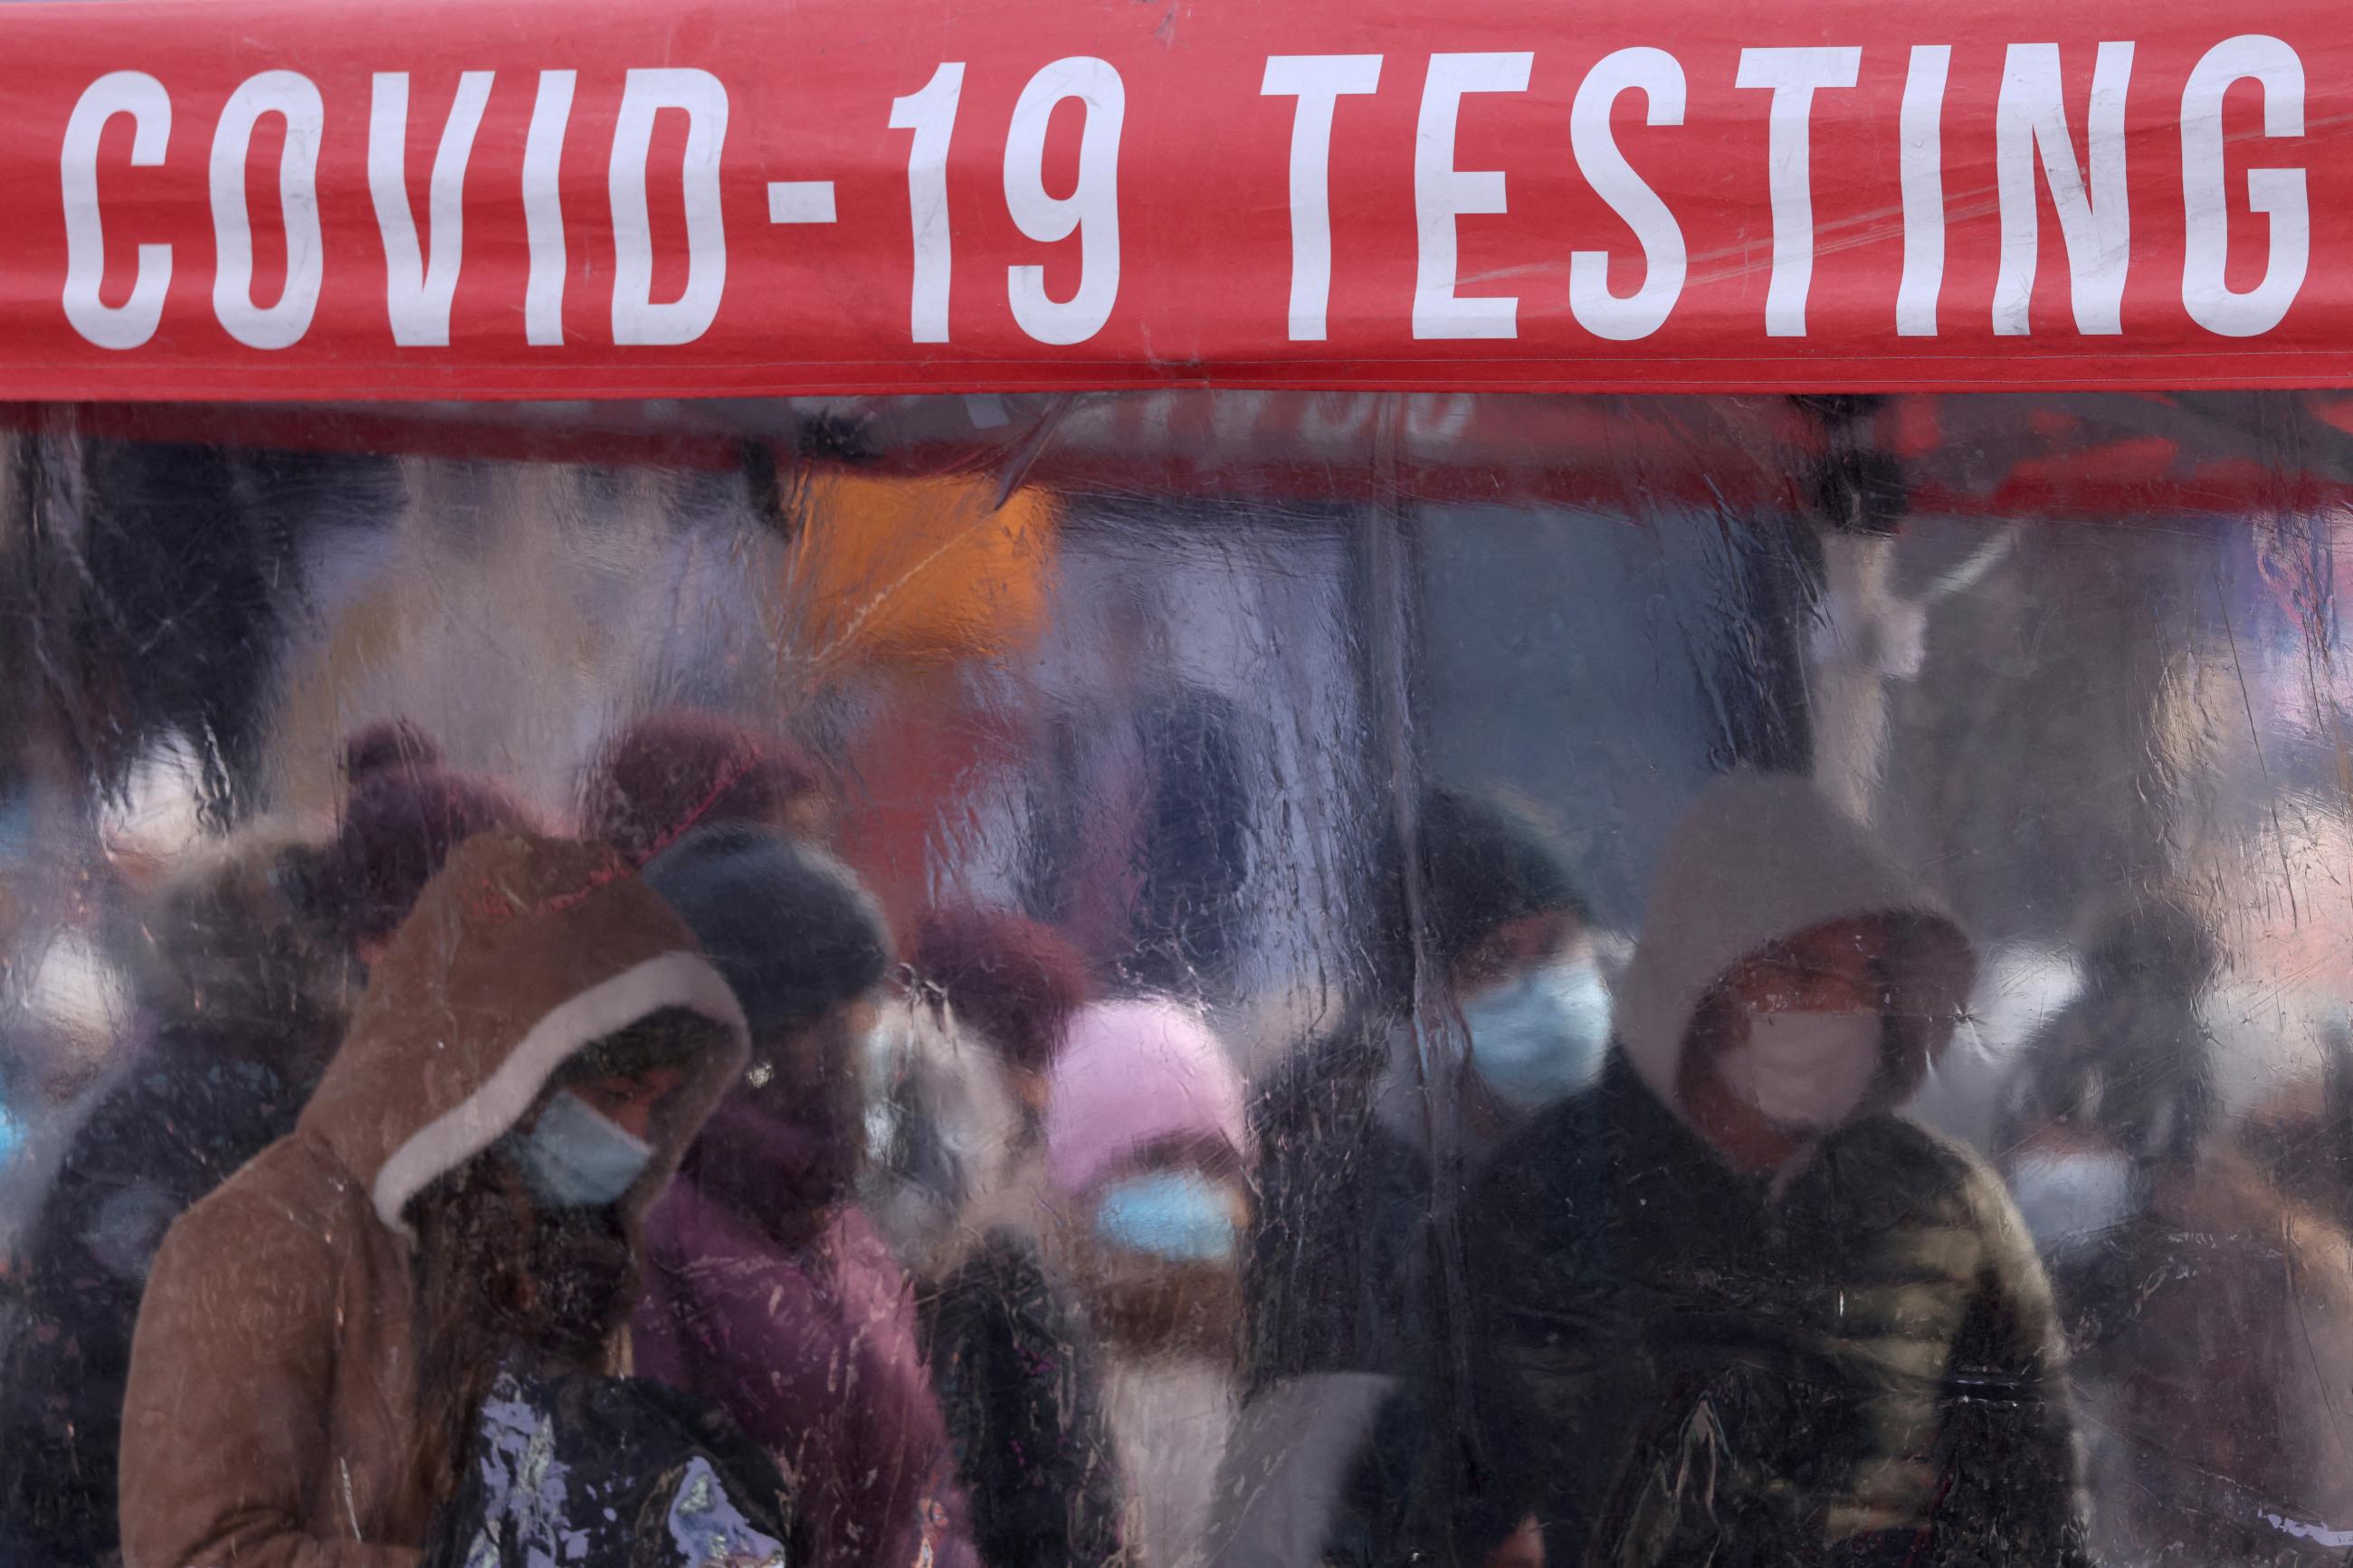 People queue to be tested for COVID-19 in Times Square, as the omicron variant continues to spread in New York City, on December 20, 2021.